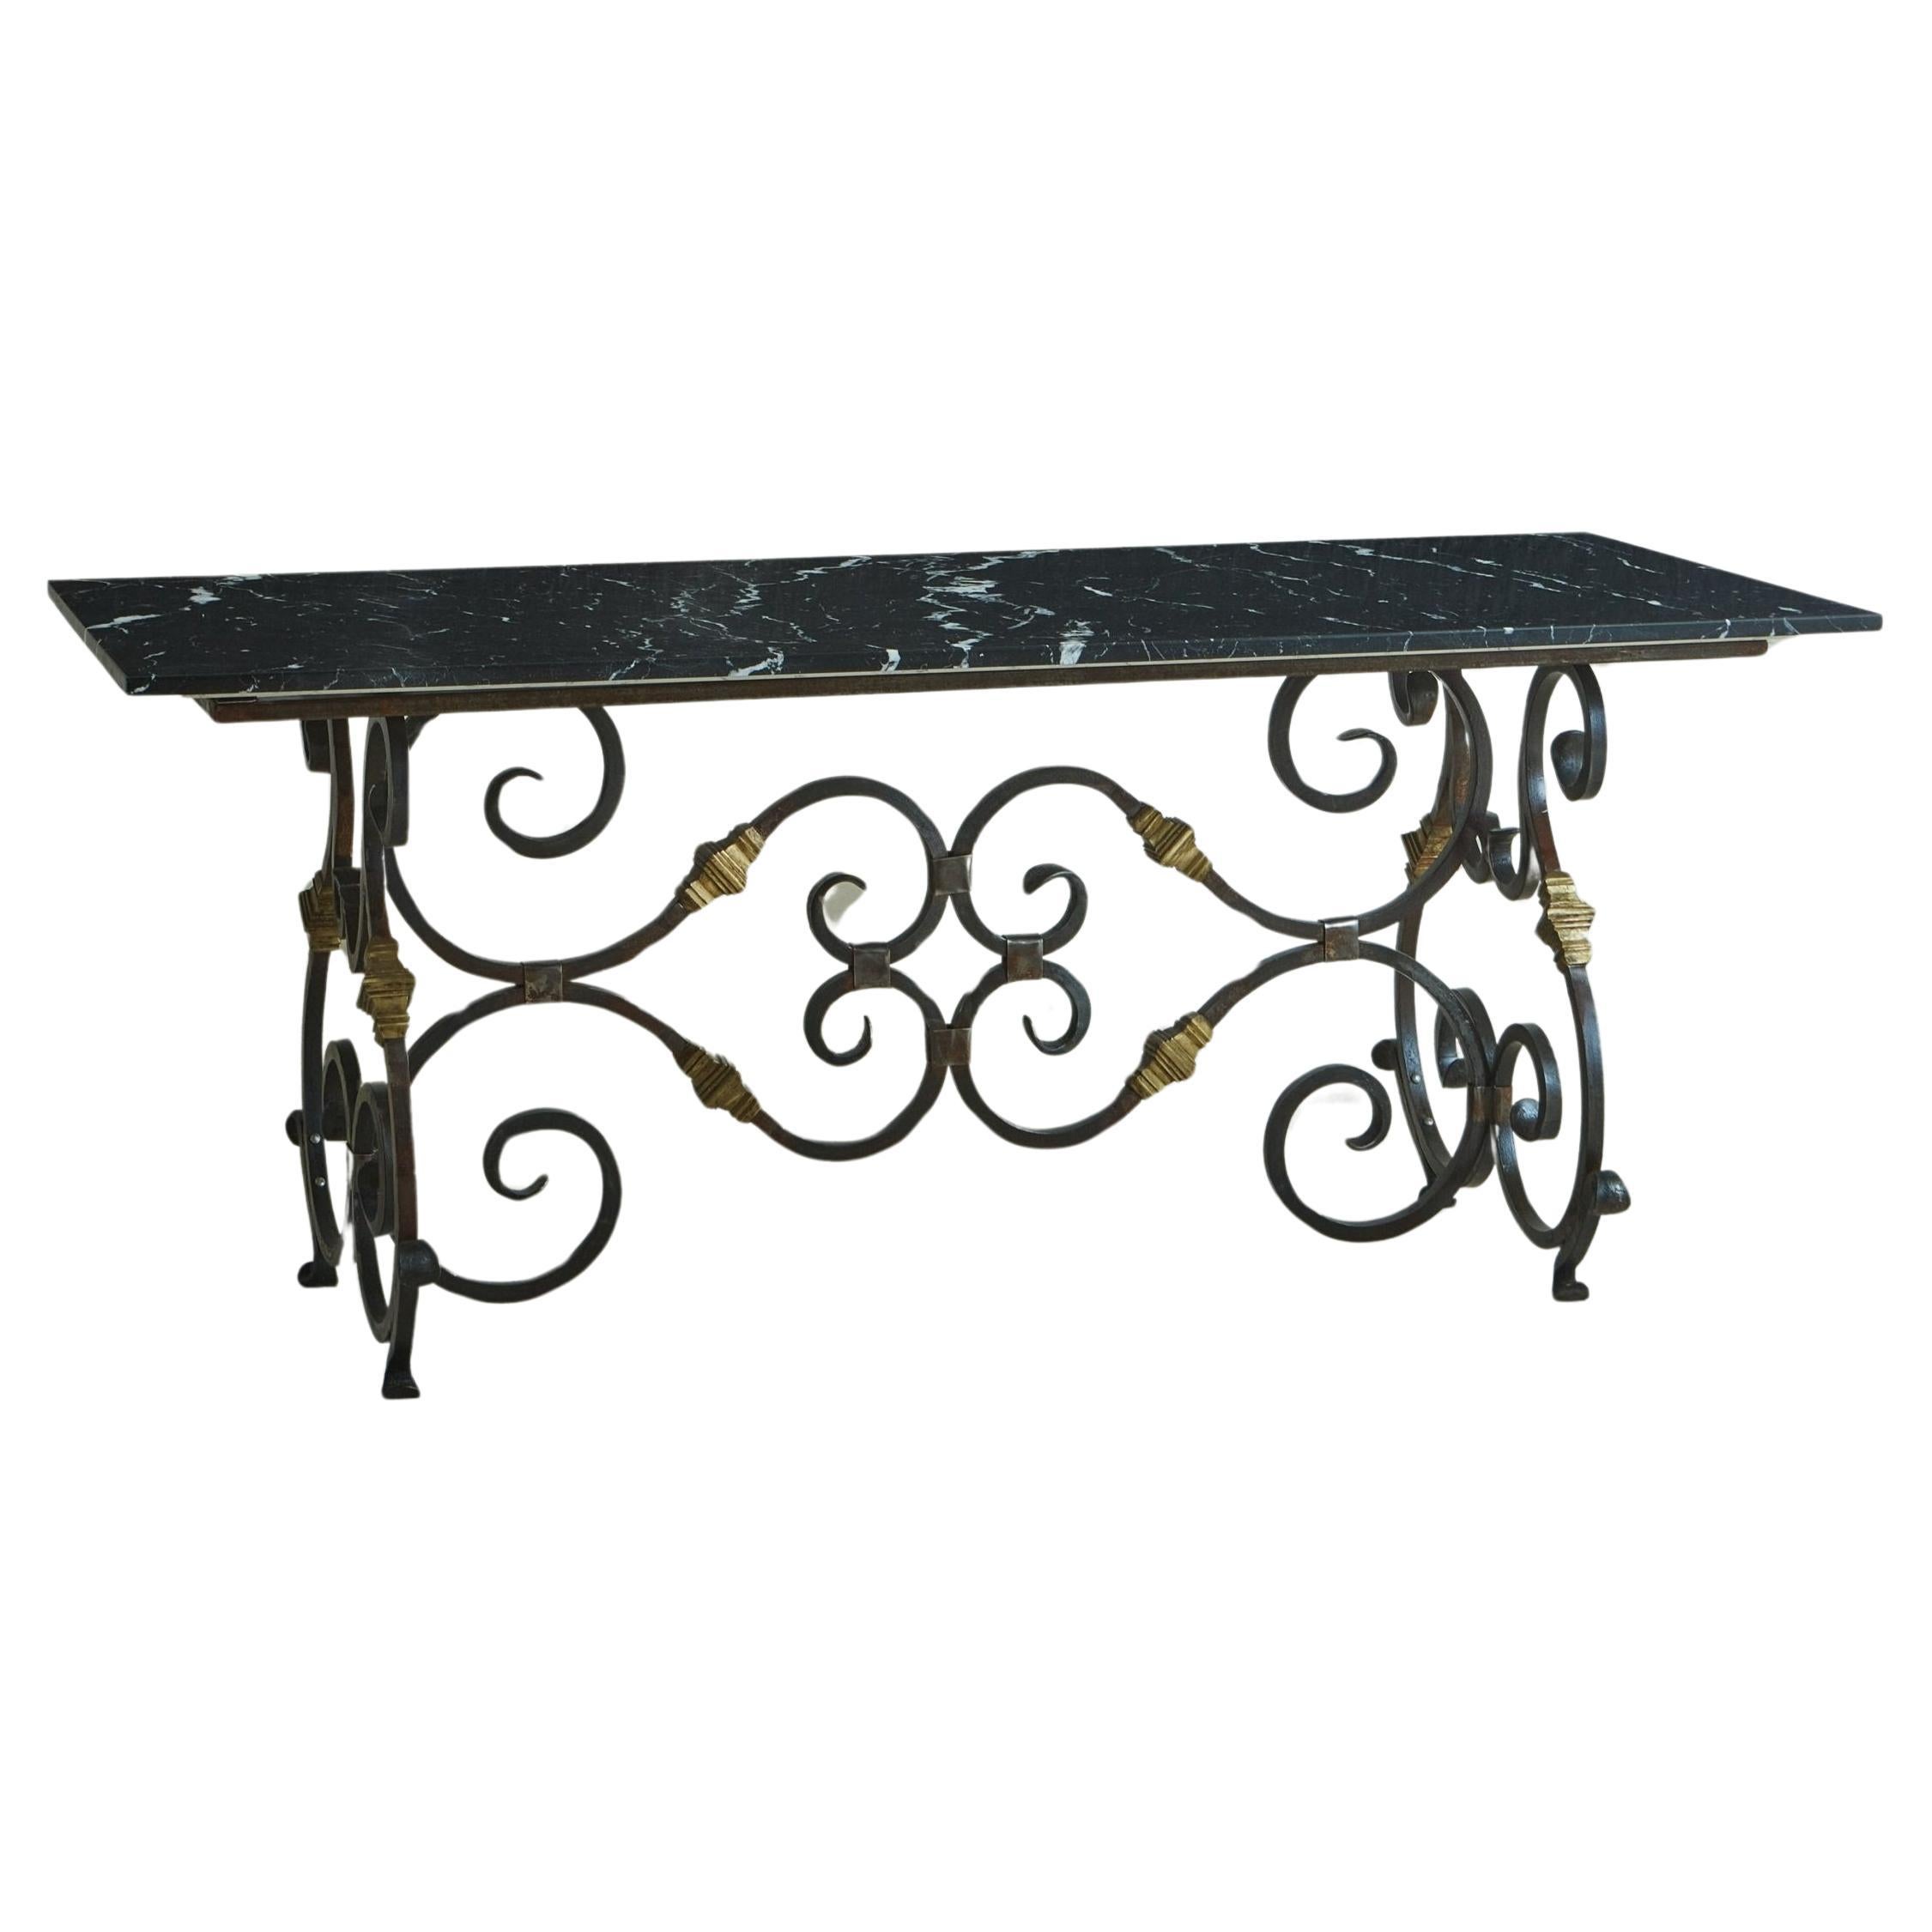 Nero Marquina Marble Dining Table with Wrought Iron Base, France 19th Century